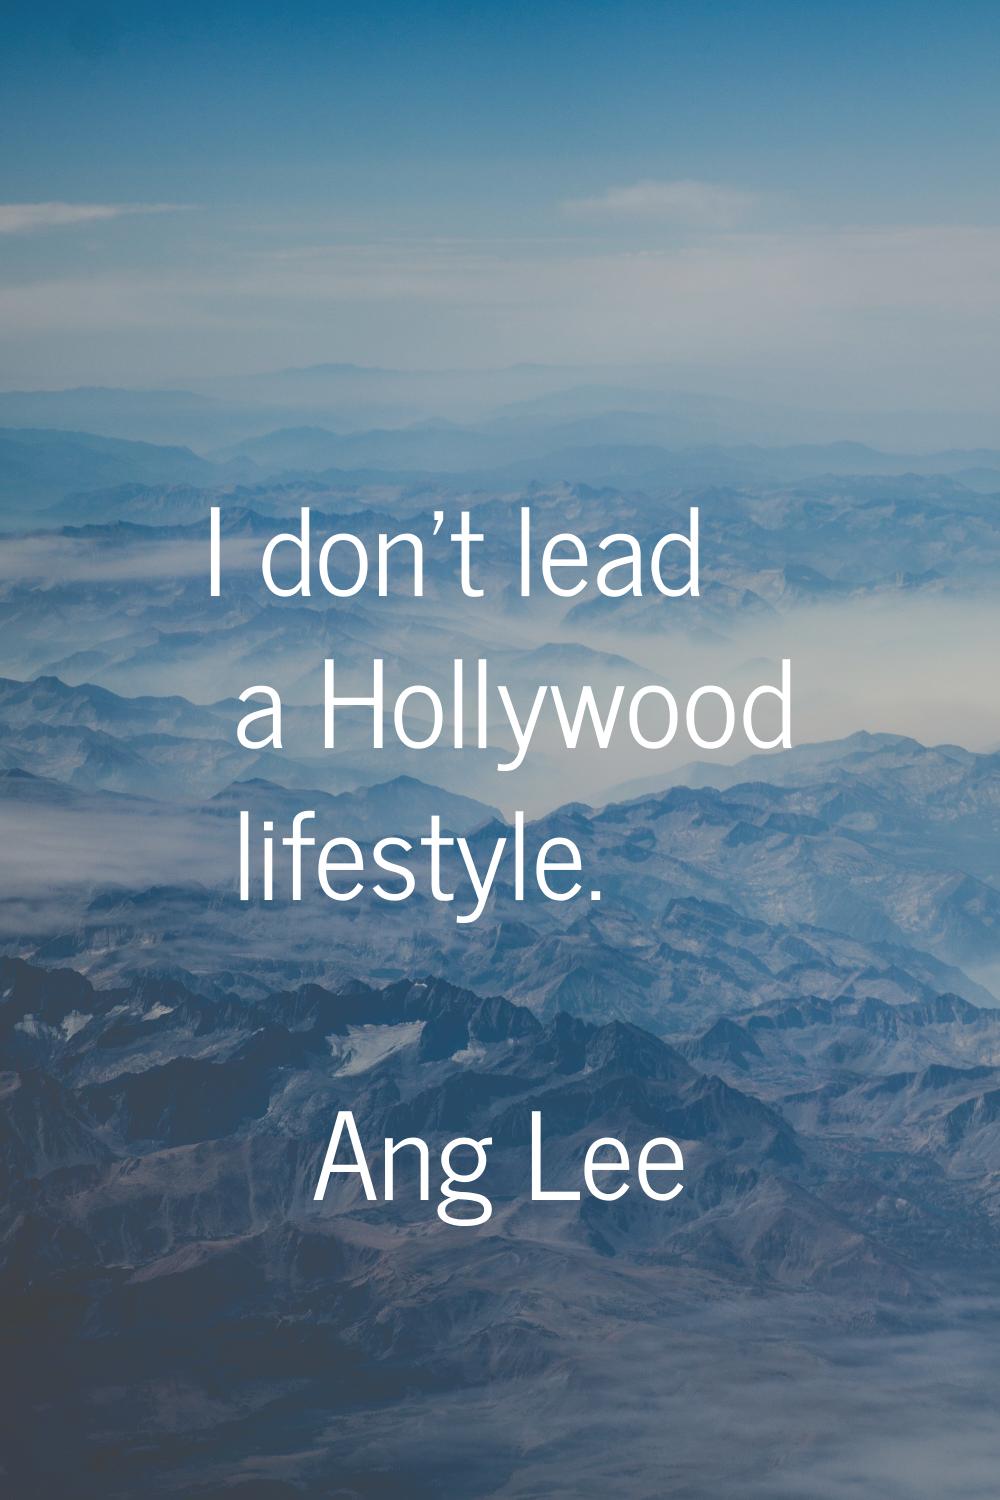 I don't lead a Hollywood lifestyle.